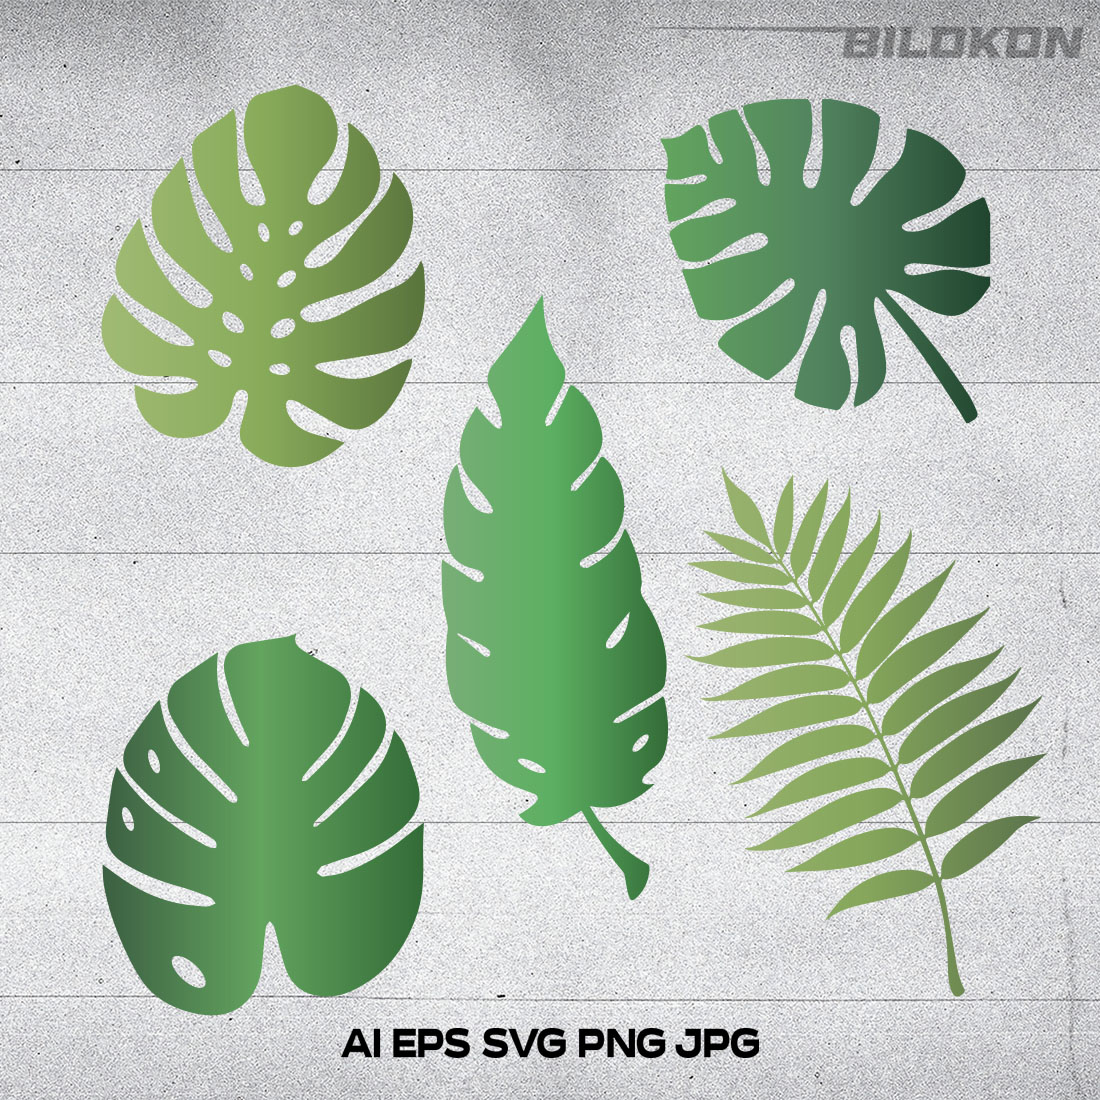 Tropical Leaves, Palm Leaves, Set Leaves, SVG Vector main cover.